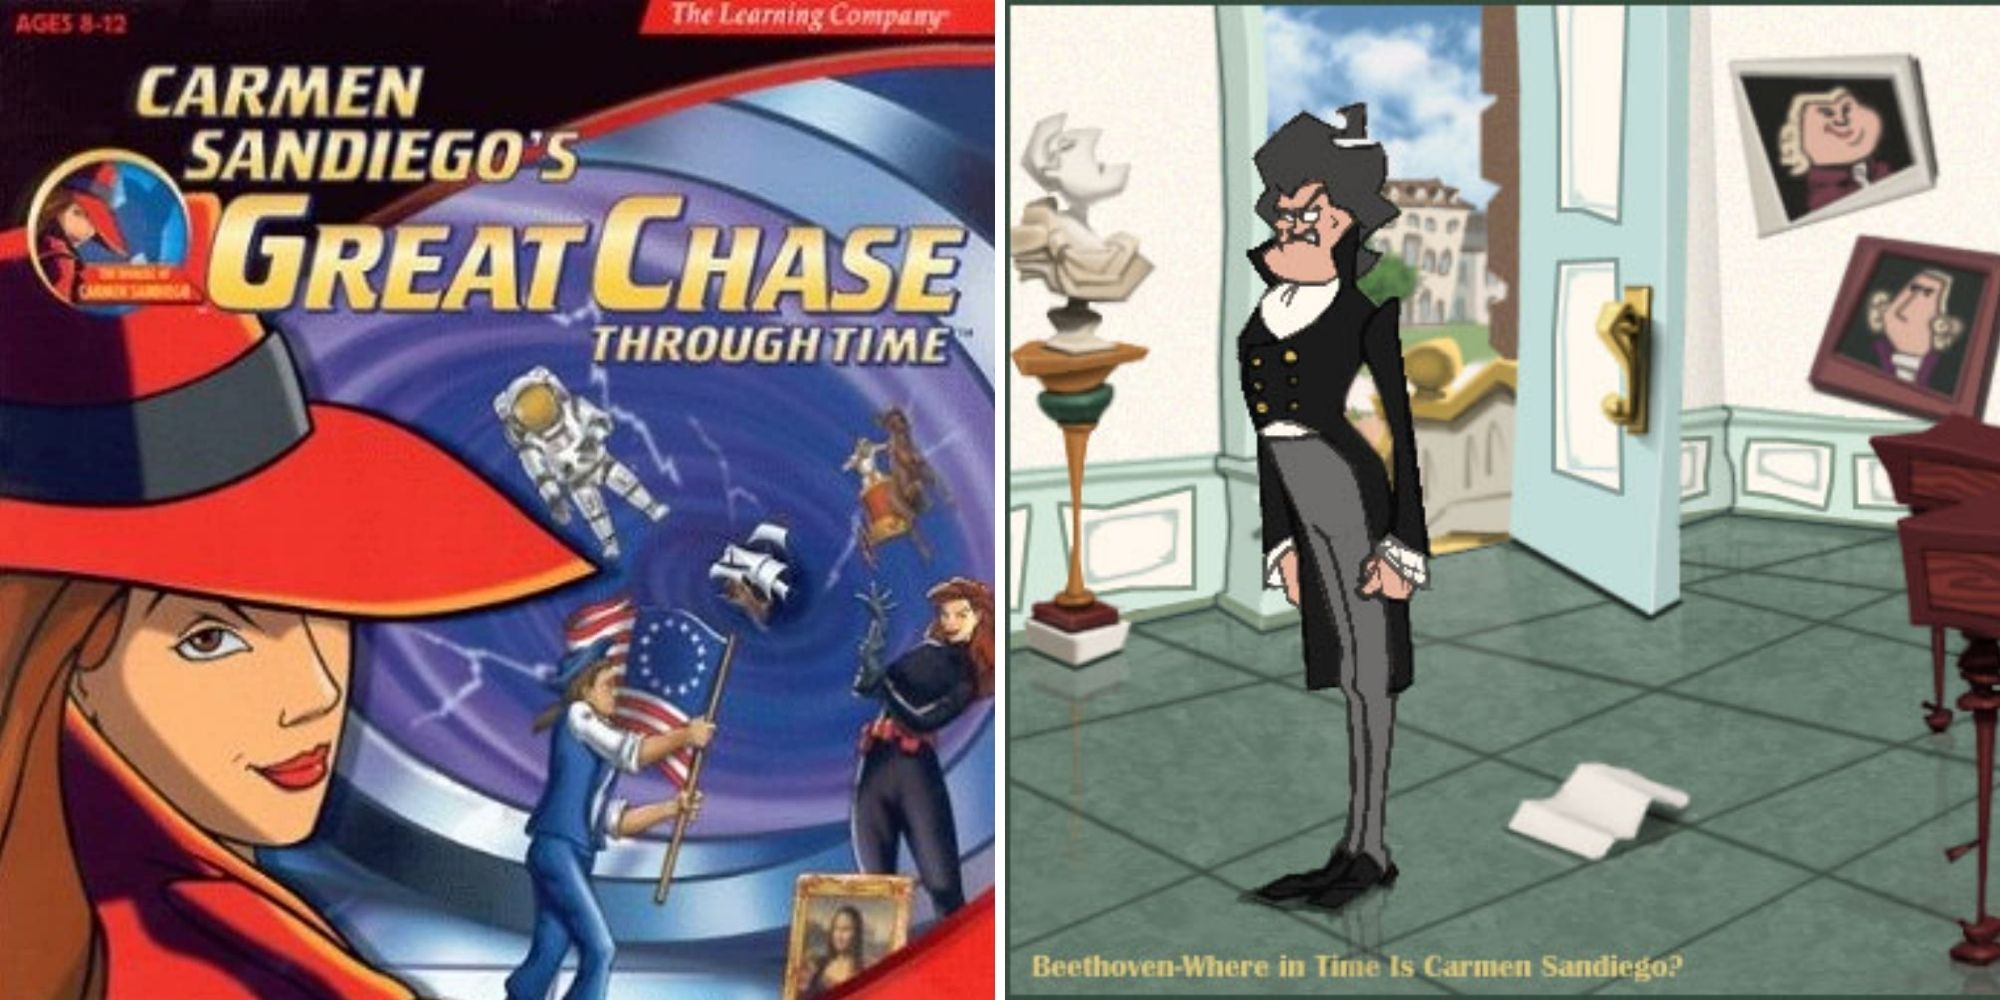 Carmen Sandiago's Great Chase Through Time game art and Ludwig Van Beethoven